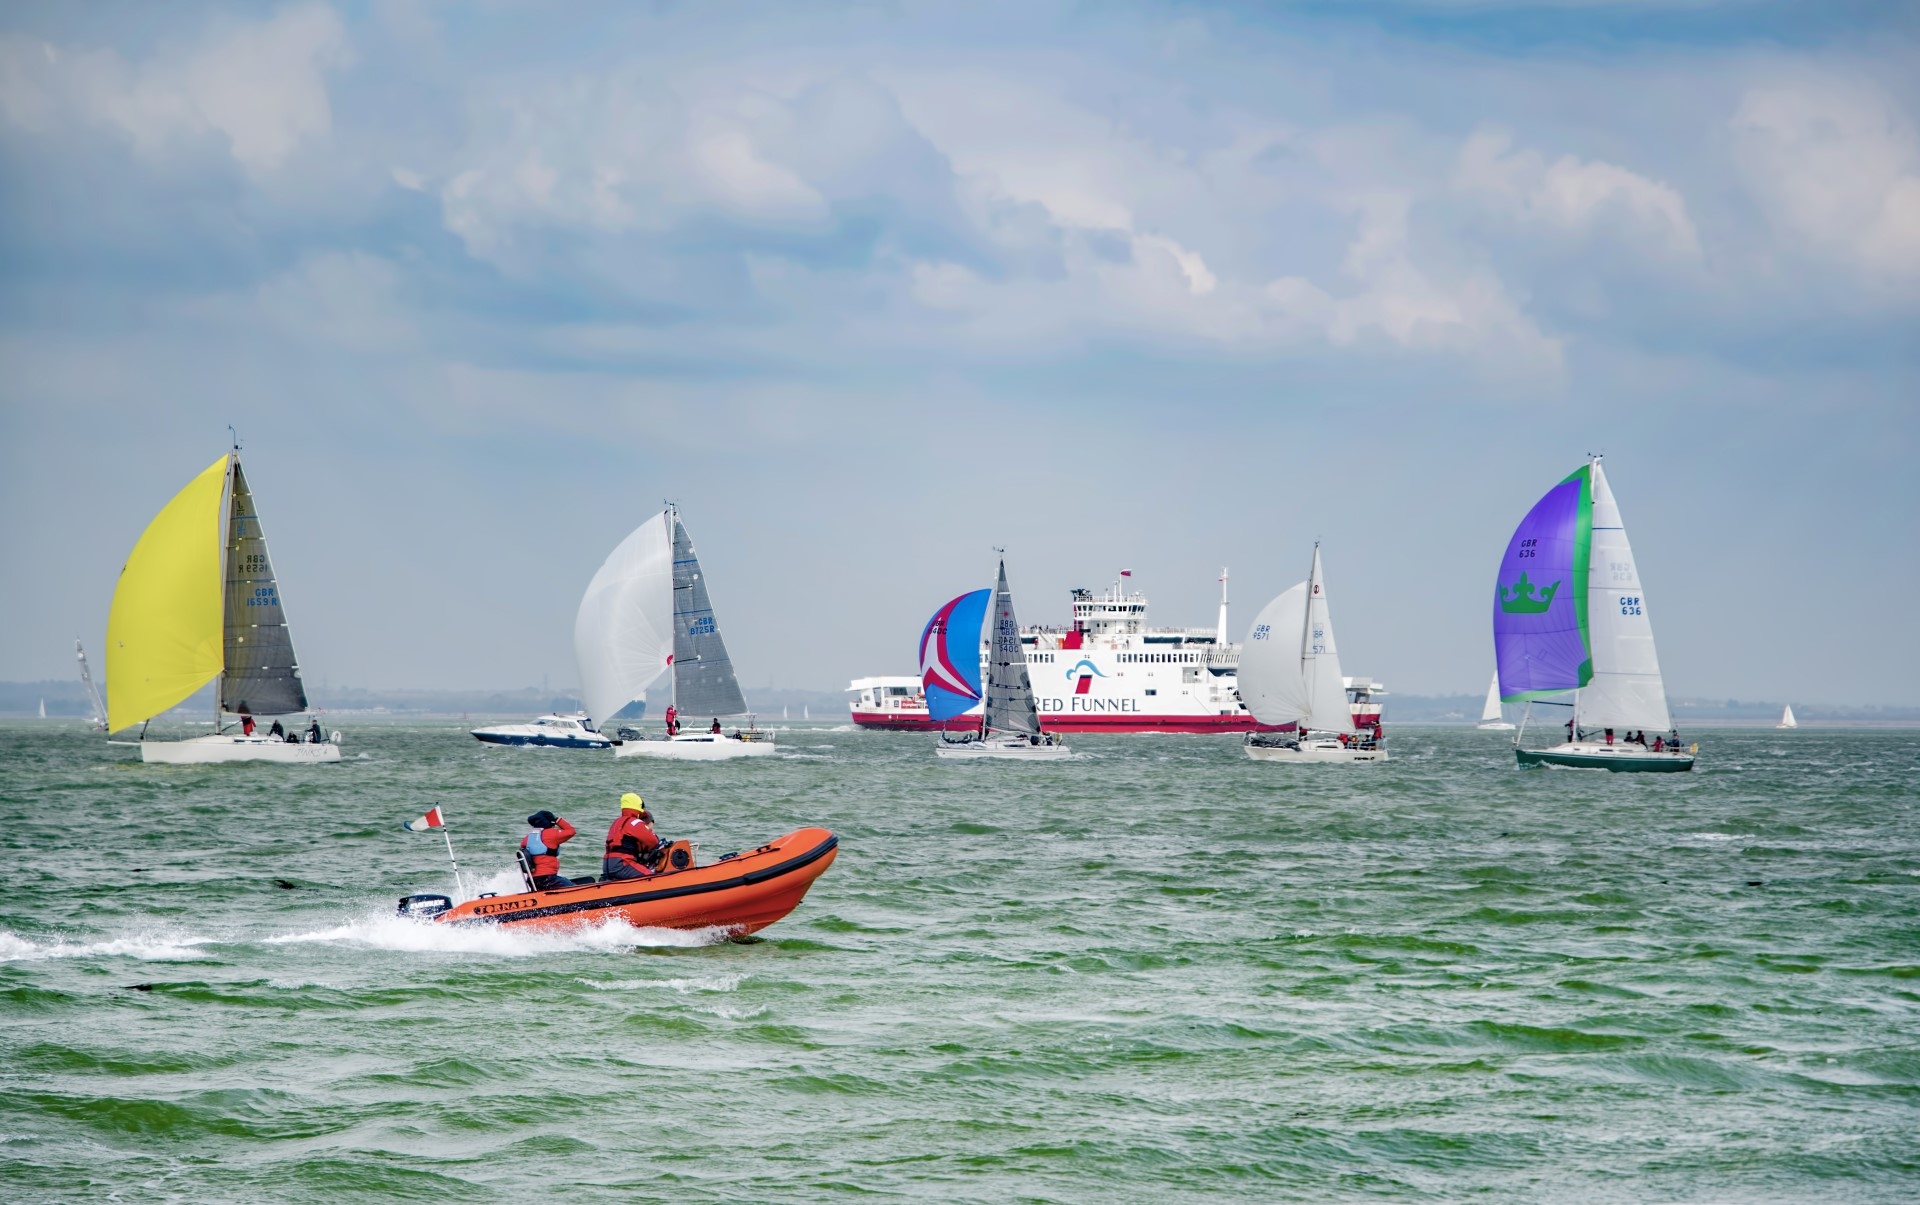 Cowes Week sailing with Red Funnel Ferry in background